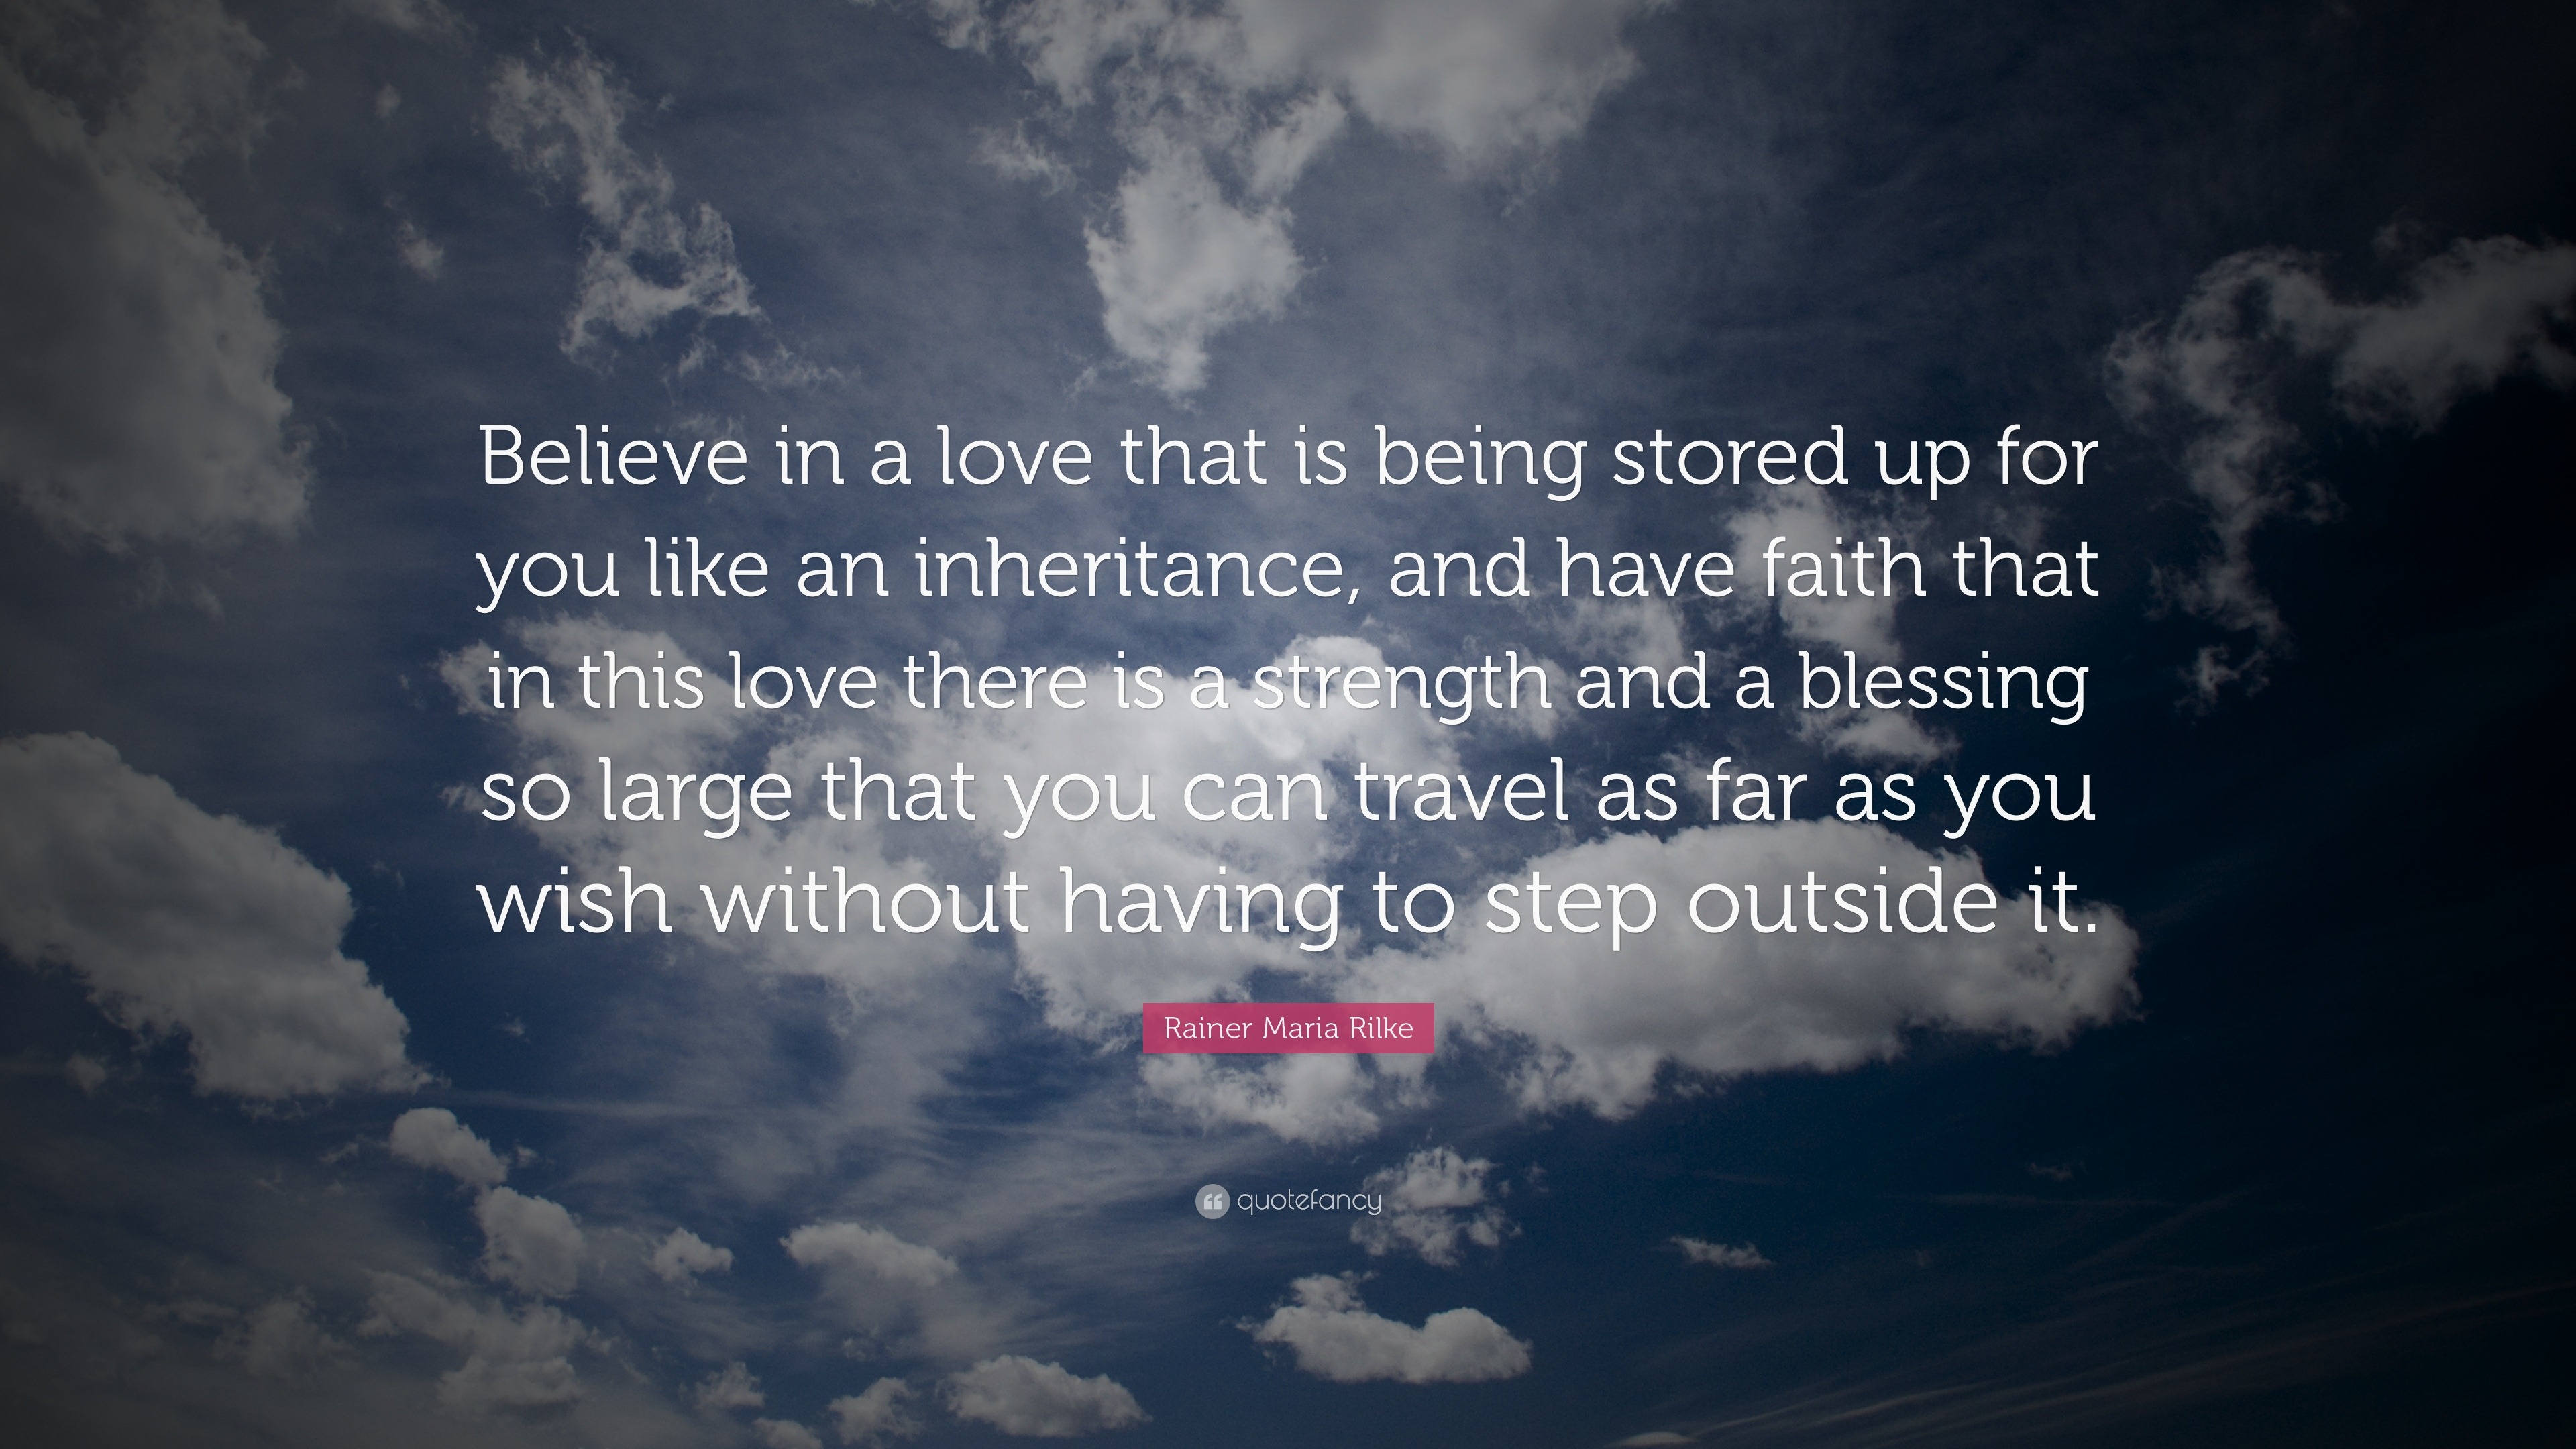 Rainer Maria Rilke Quote “Believe in a love that is being stored up for